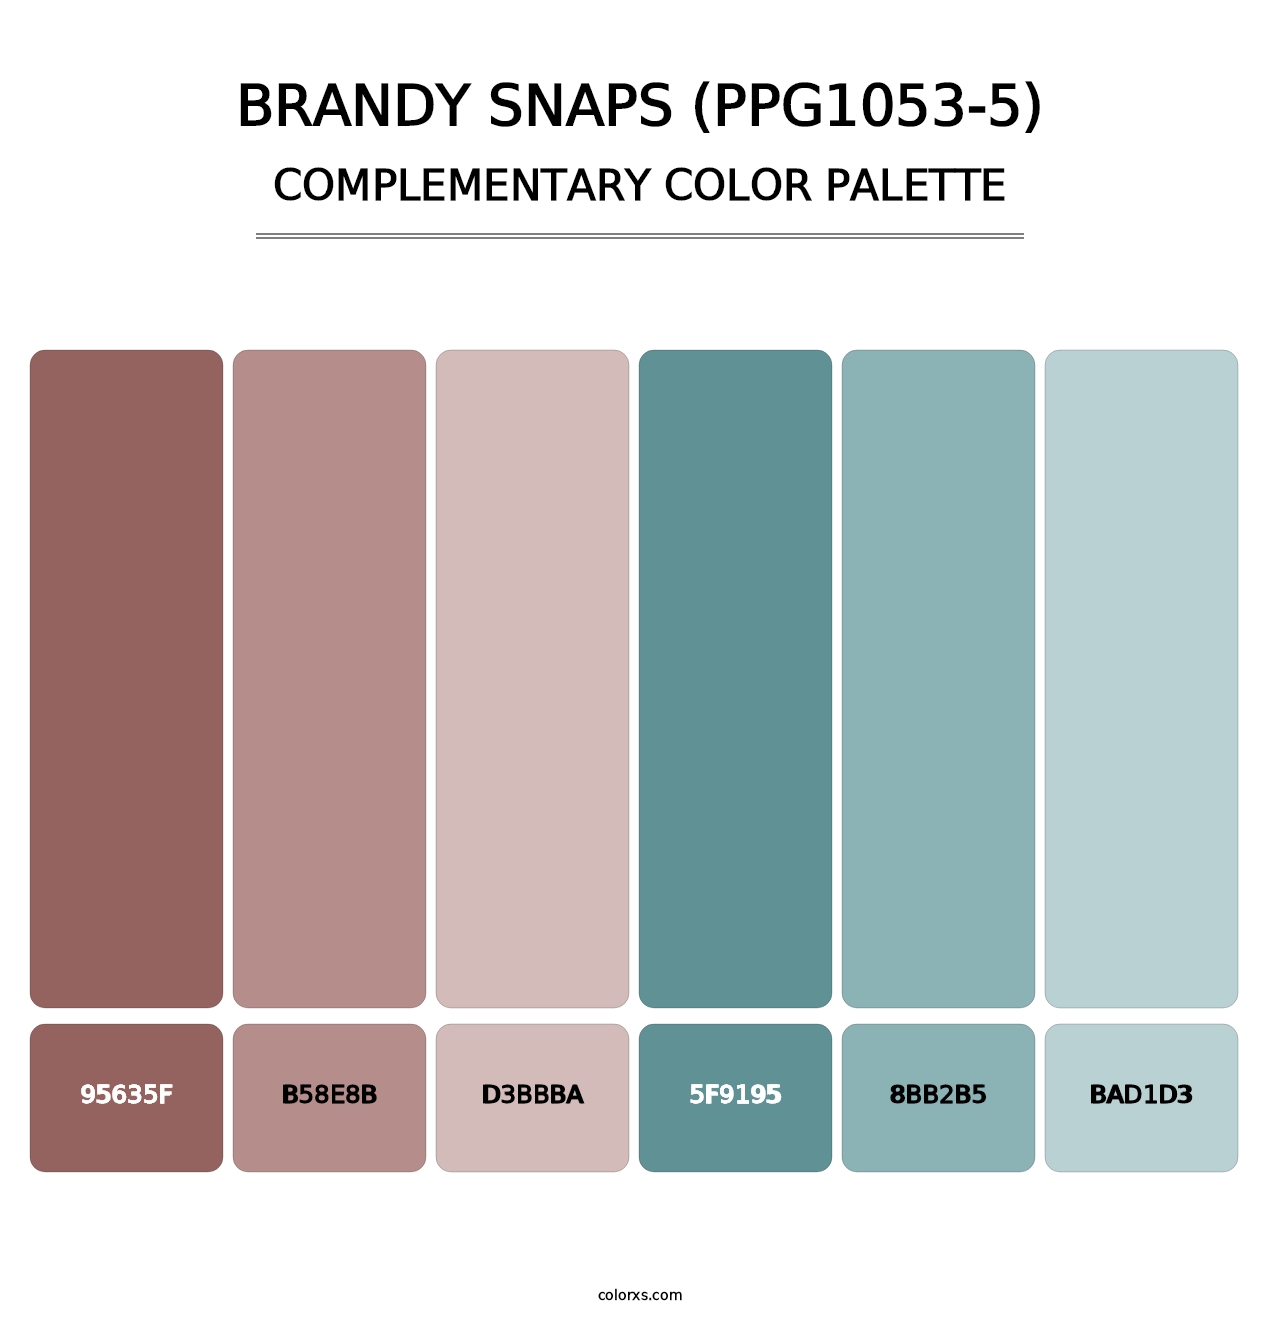 Brandy Snaps (PPG1053-5) - Complementary Color Palette